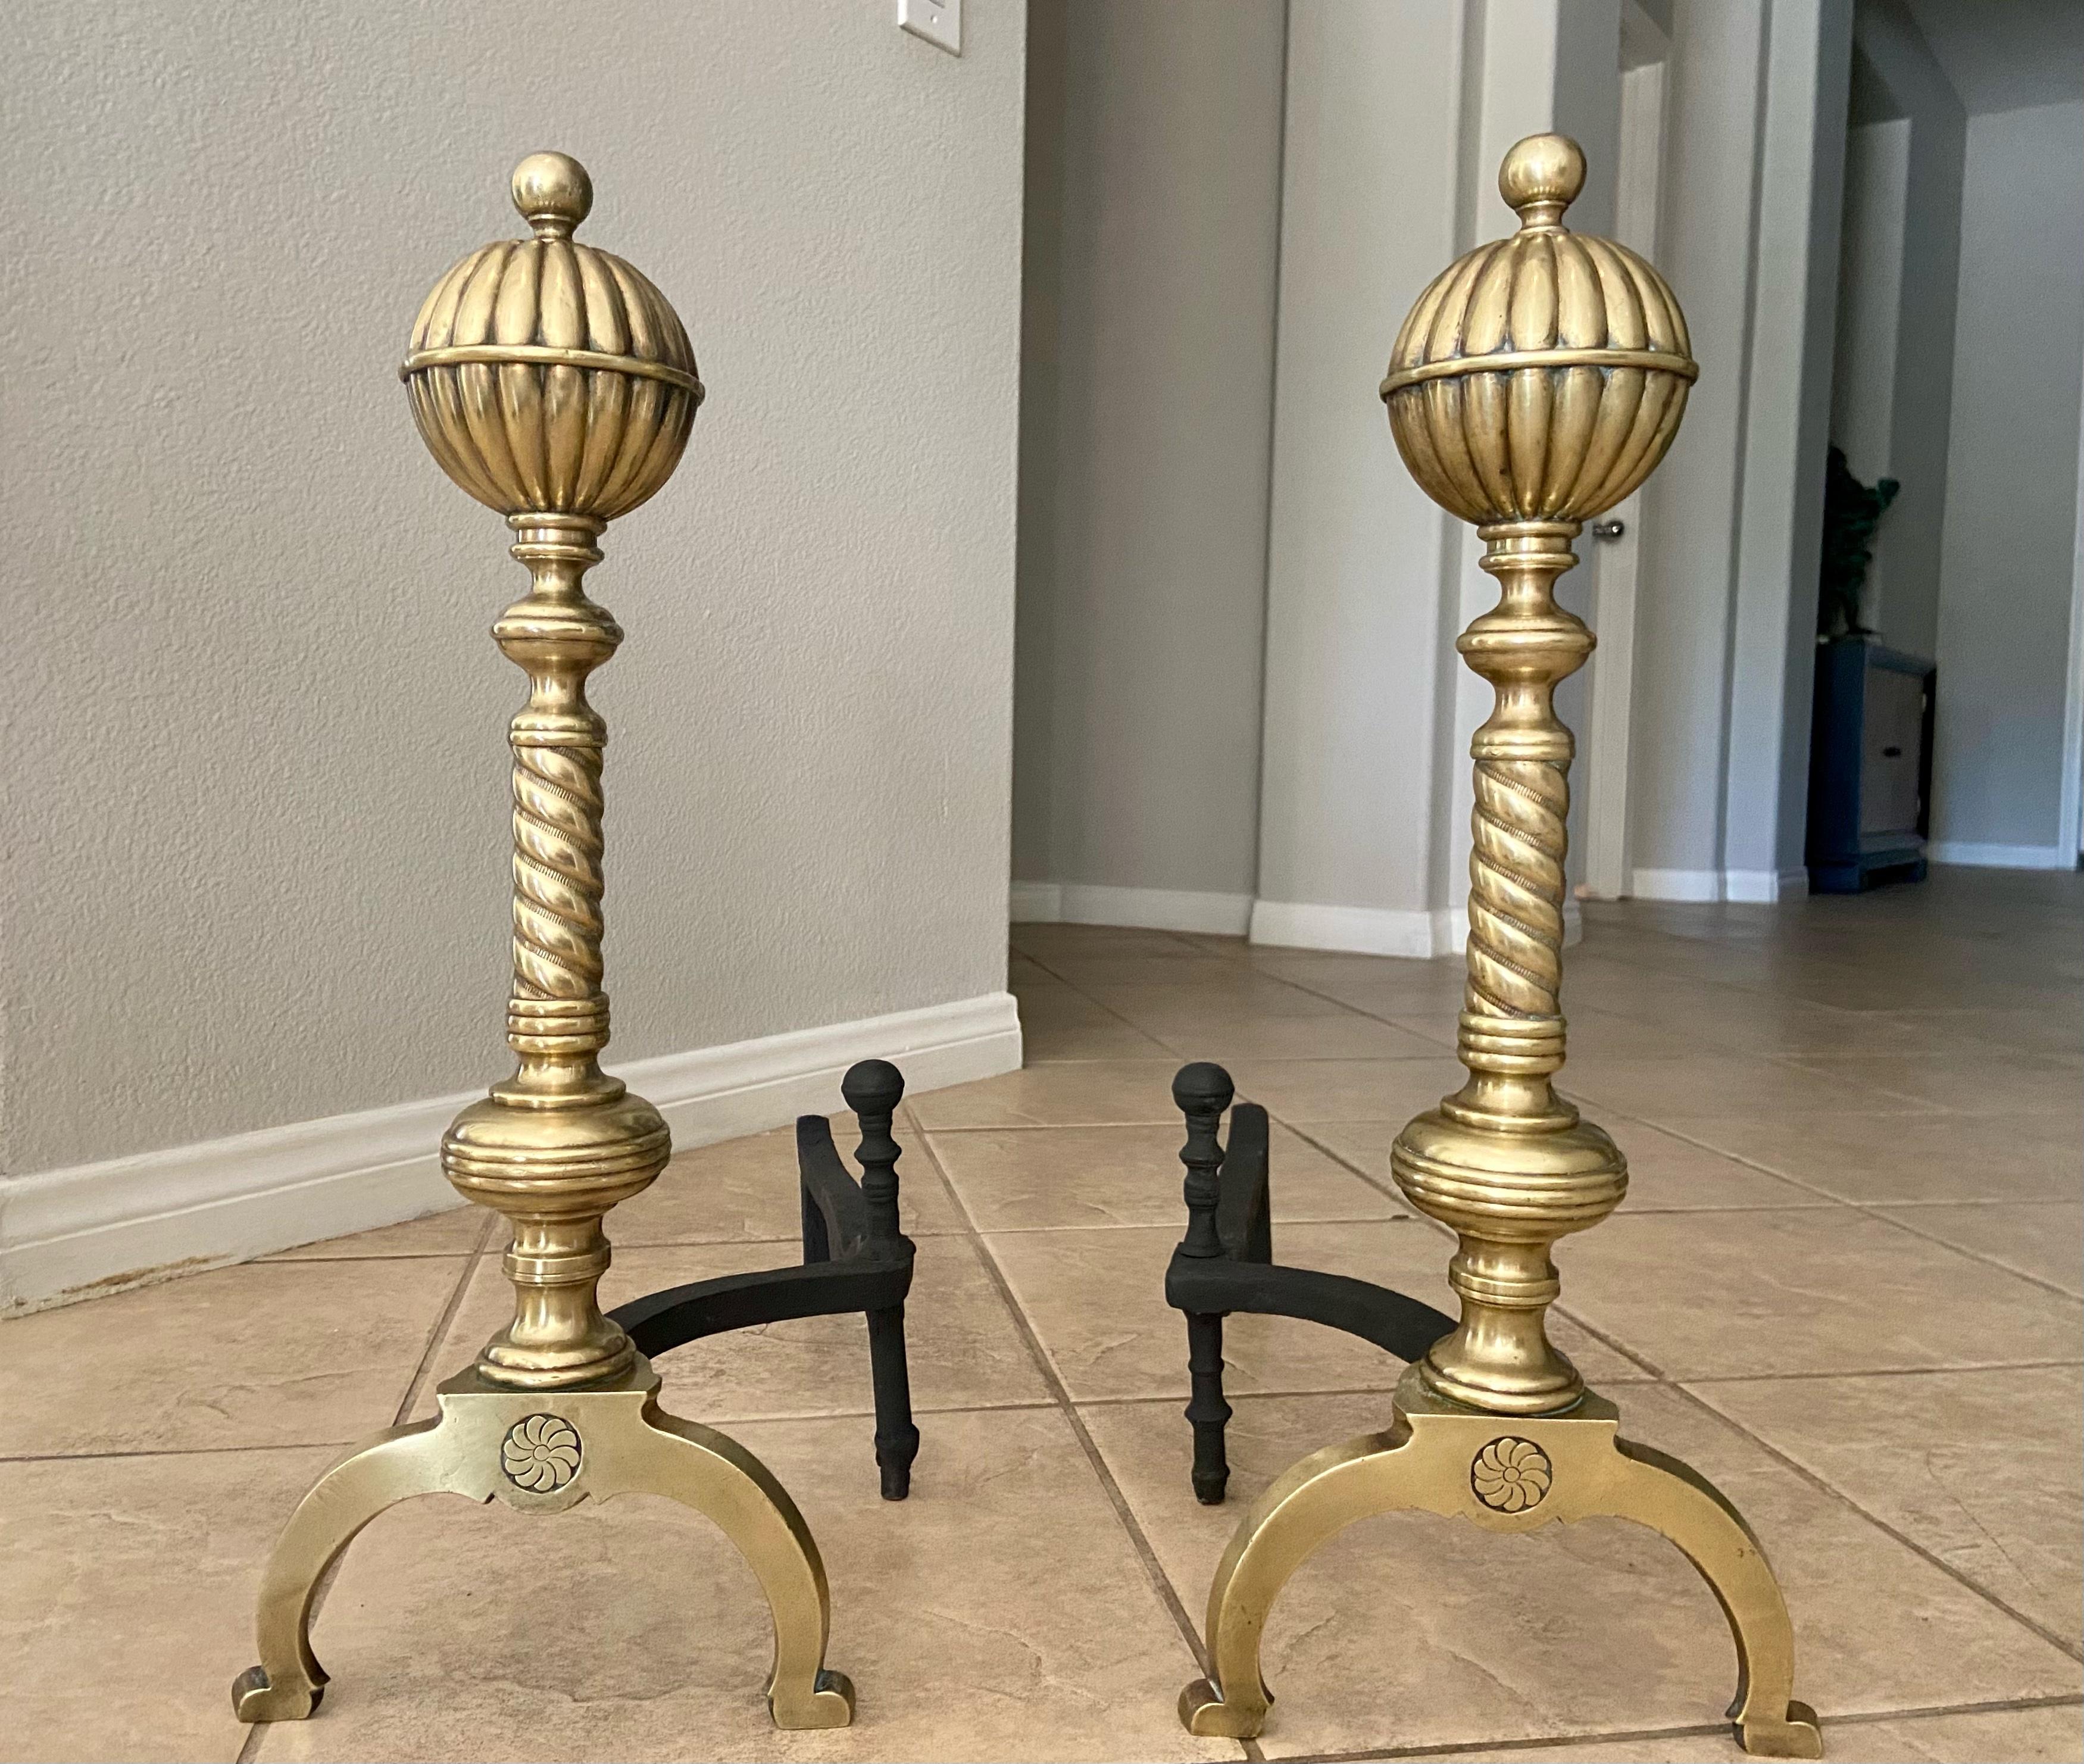 Pair of 19th century brass baluster shaped andirons with ball and pinwheel motif . A unique silhouette that can blend with both traditional and eclectic interiors.